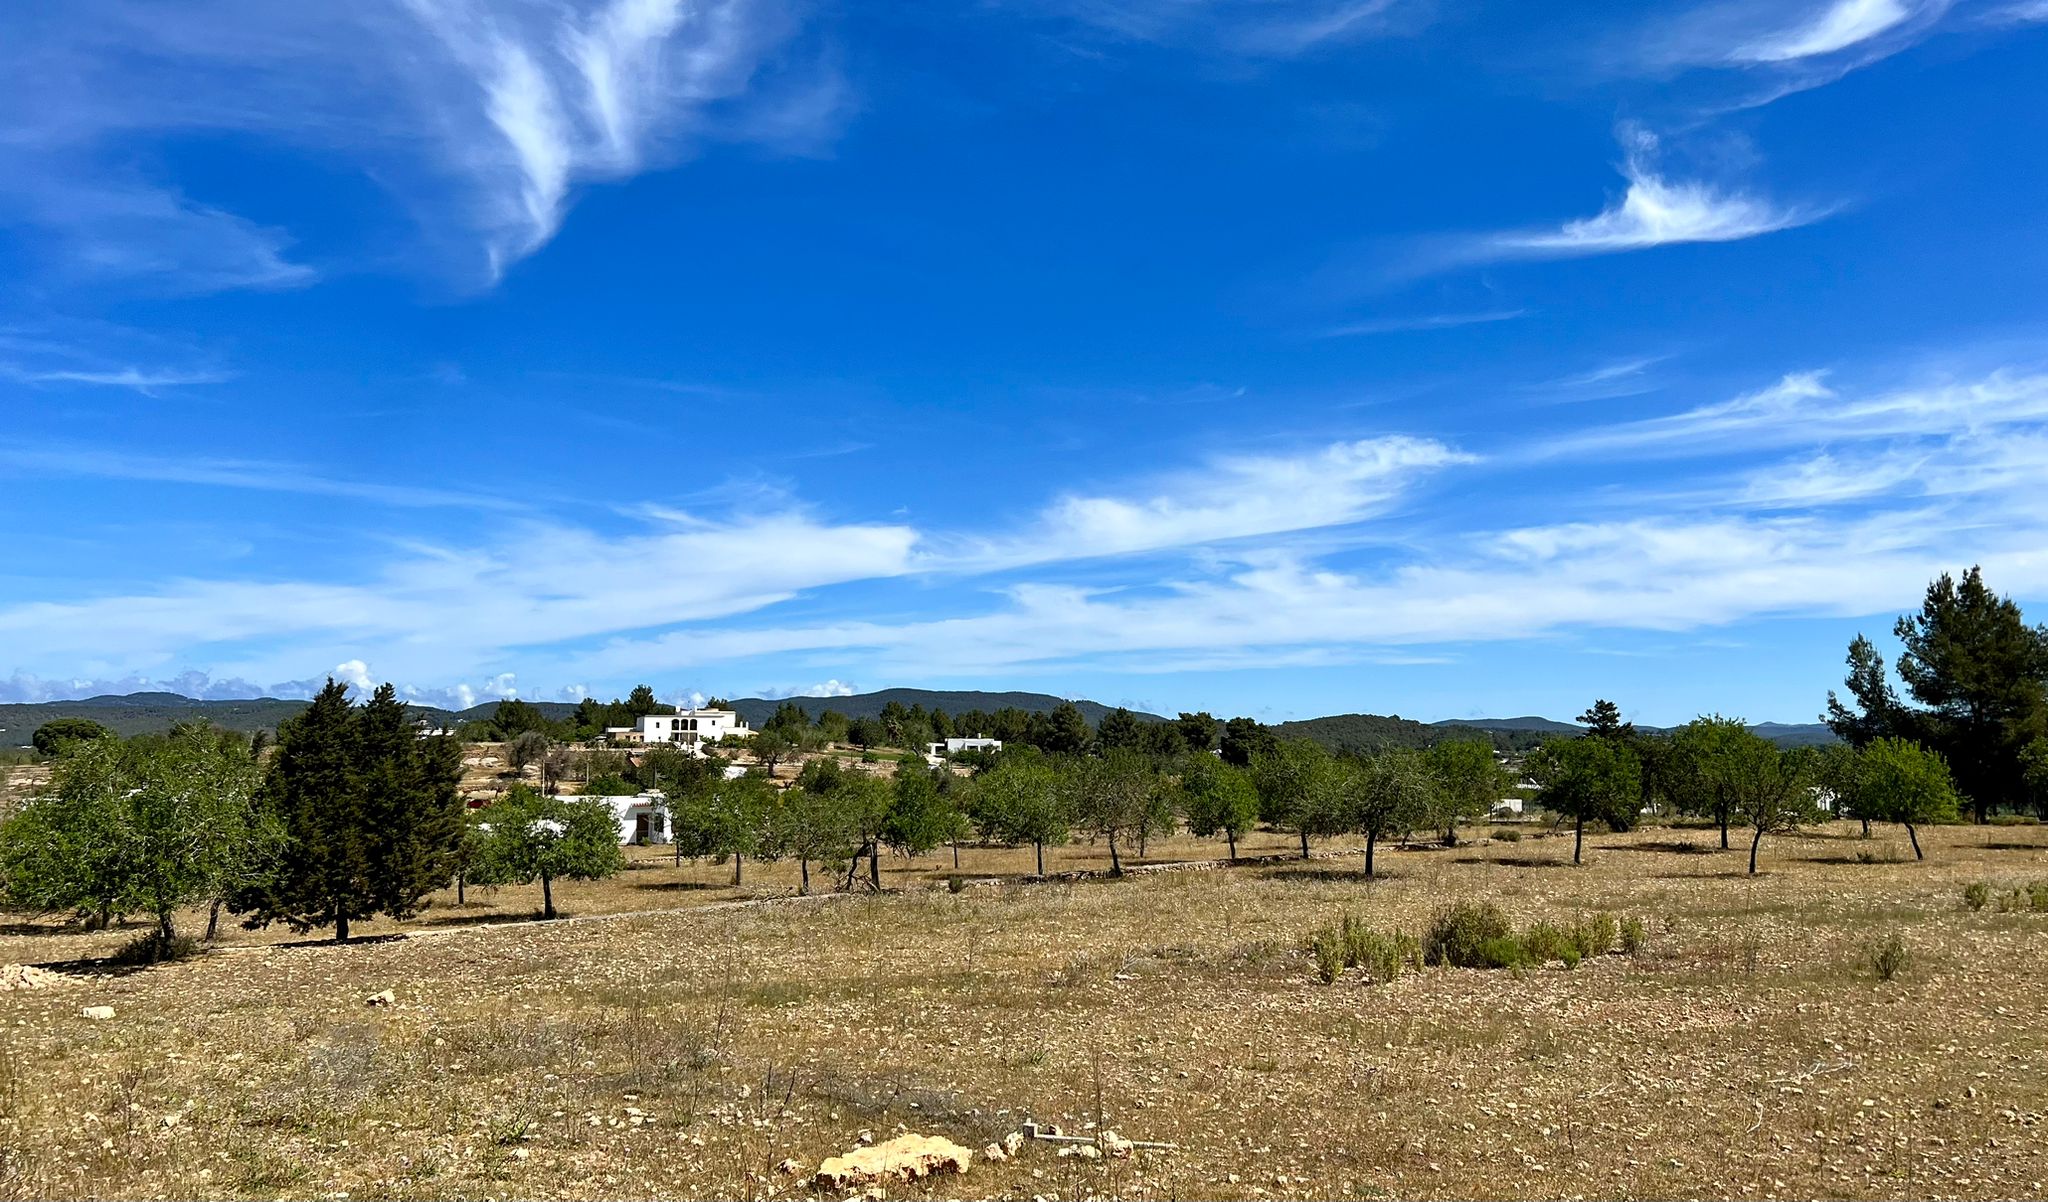 Plot of 40.000 sqm in Benimussa near San Rafael with license to build requested